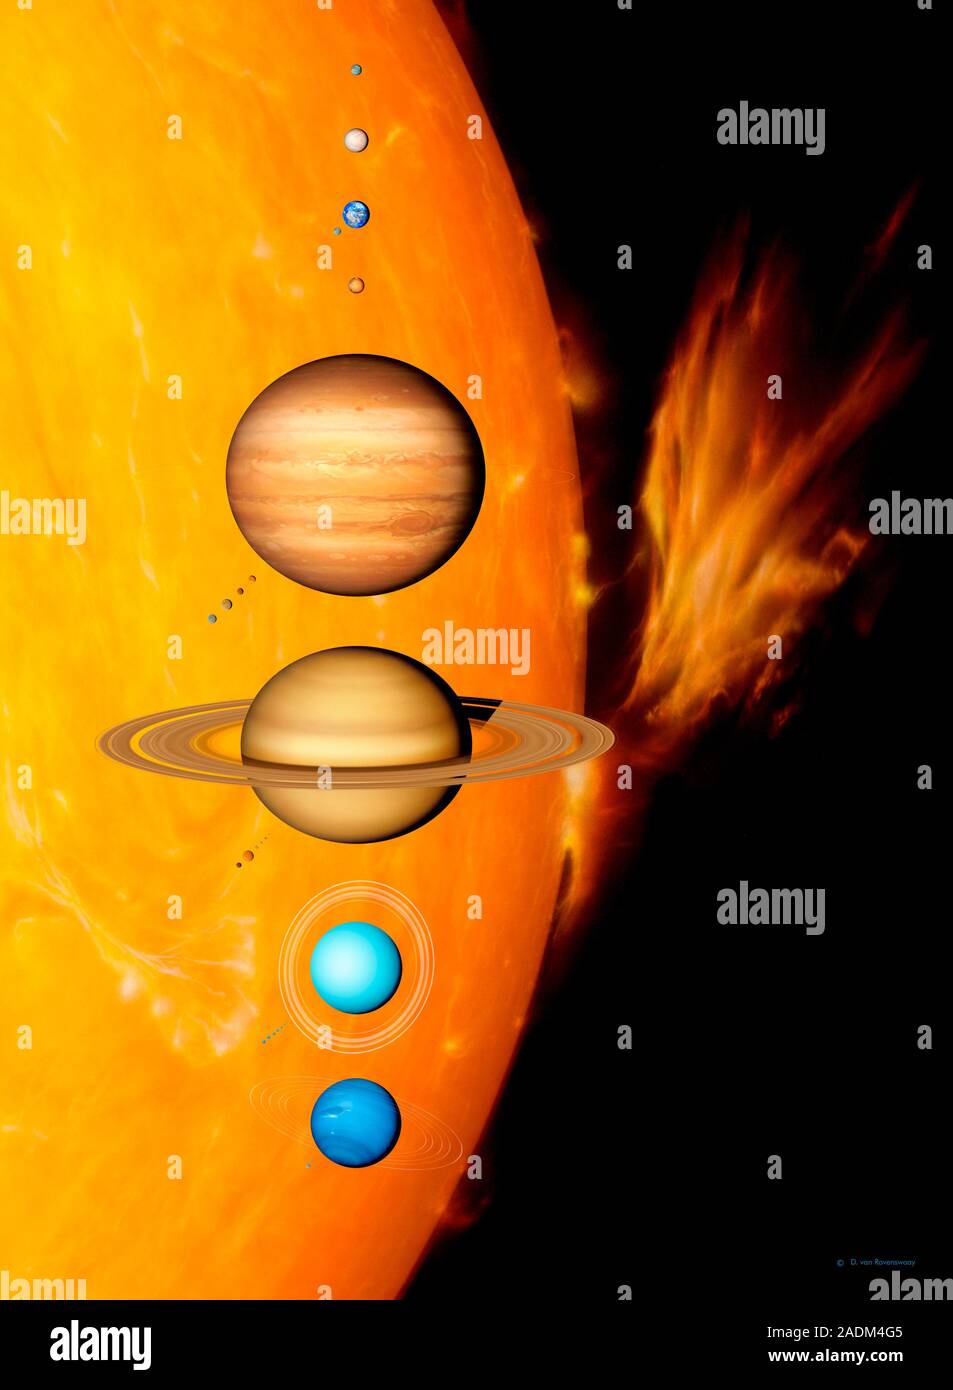 Sun and its planets. Artwork of the eight planets of the solar system ...